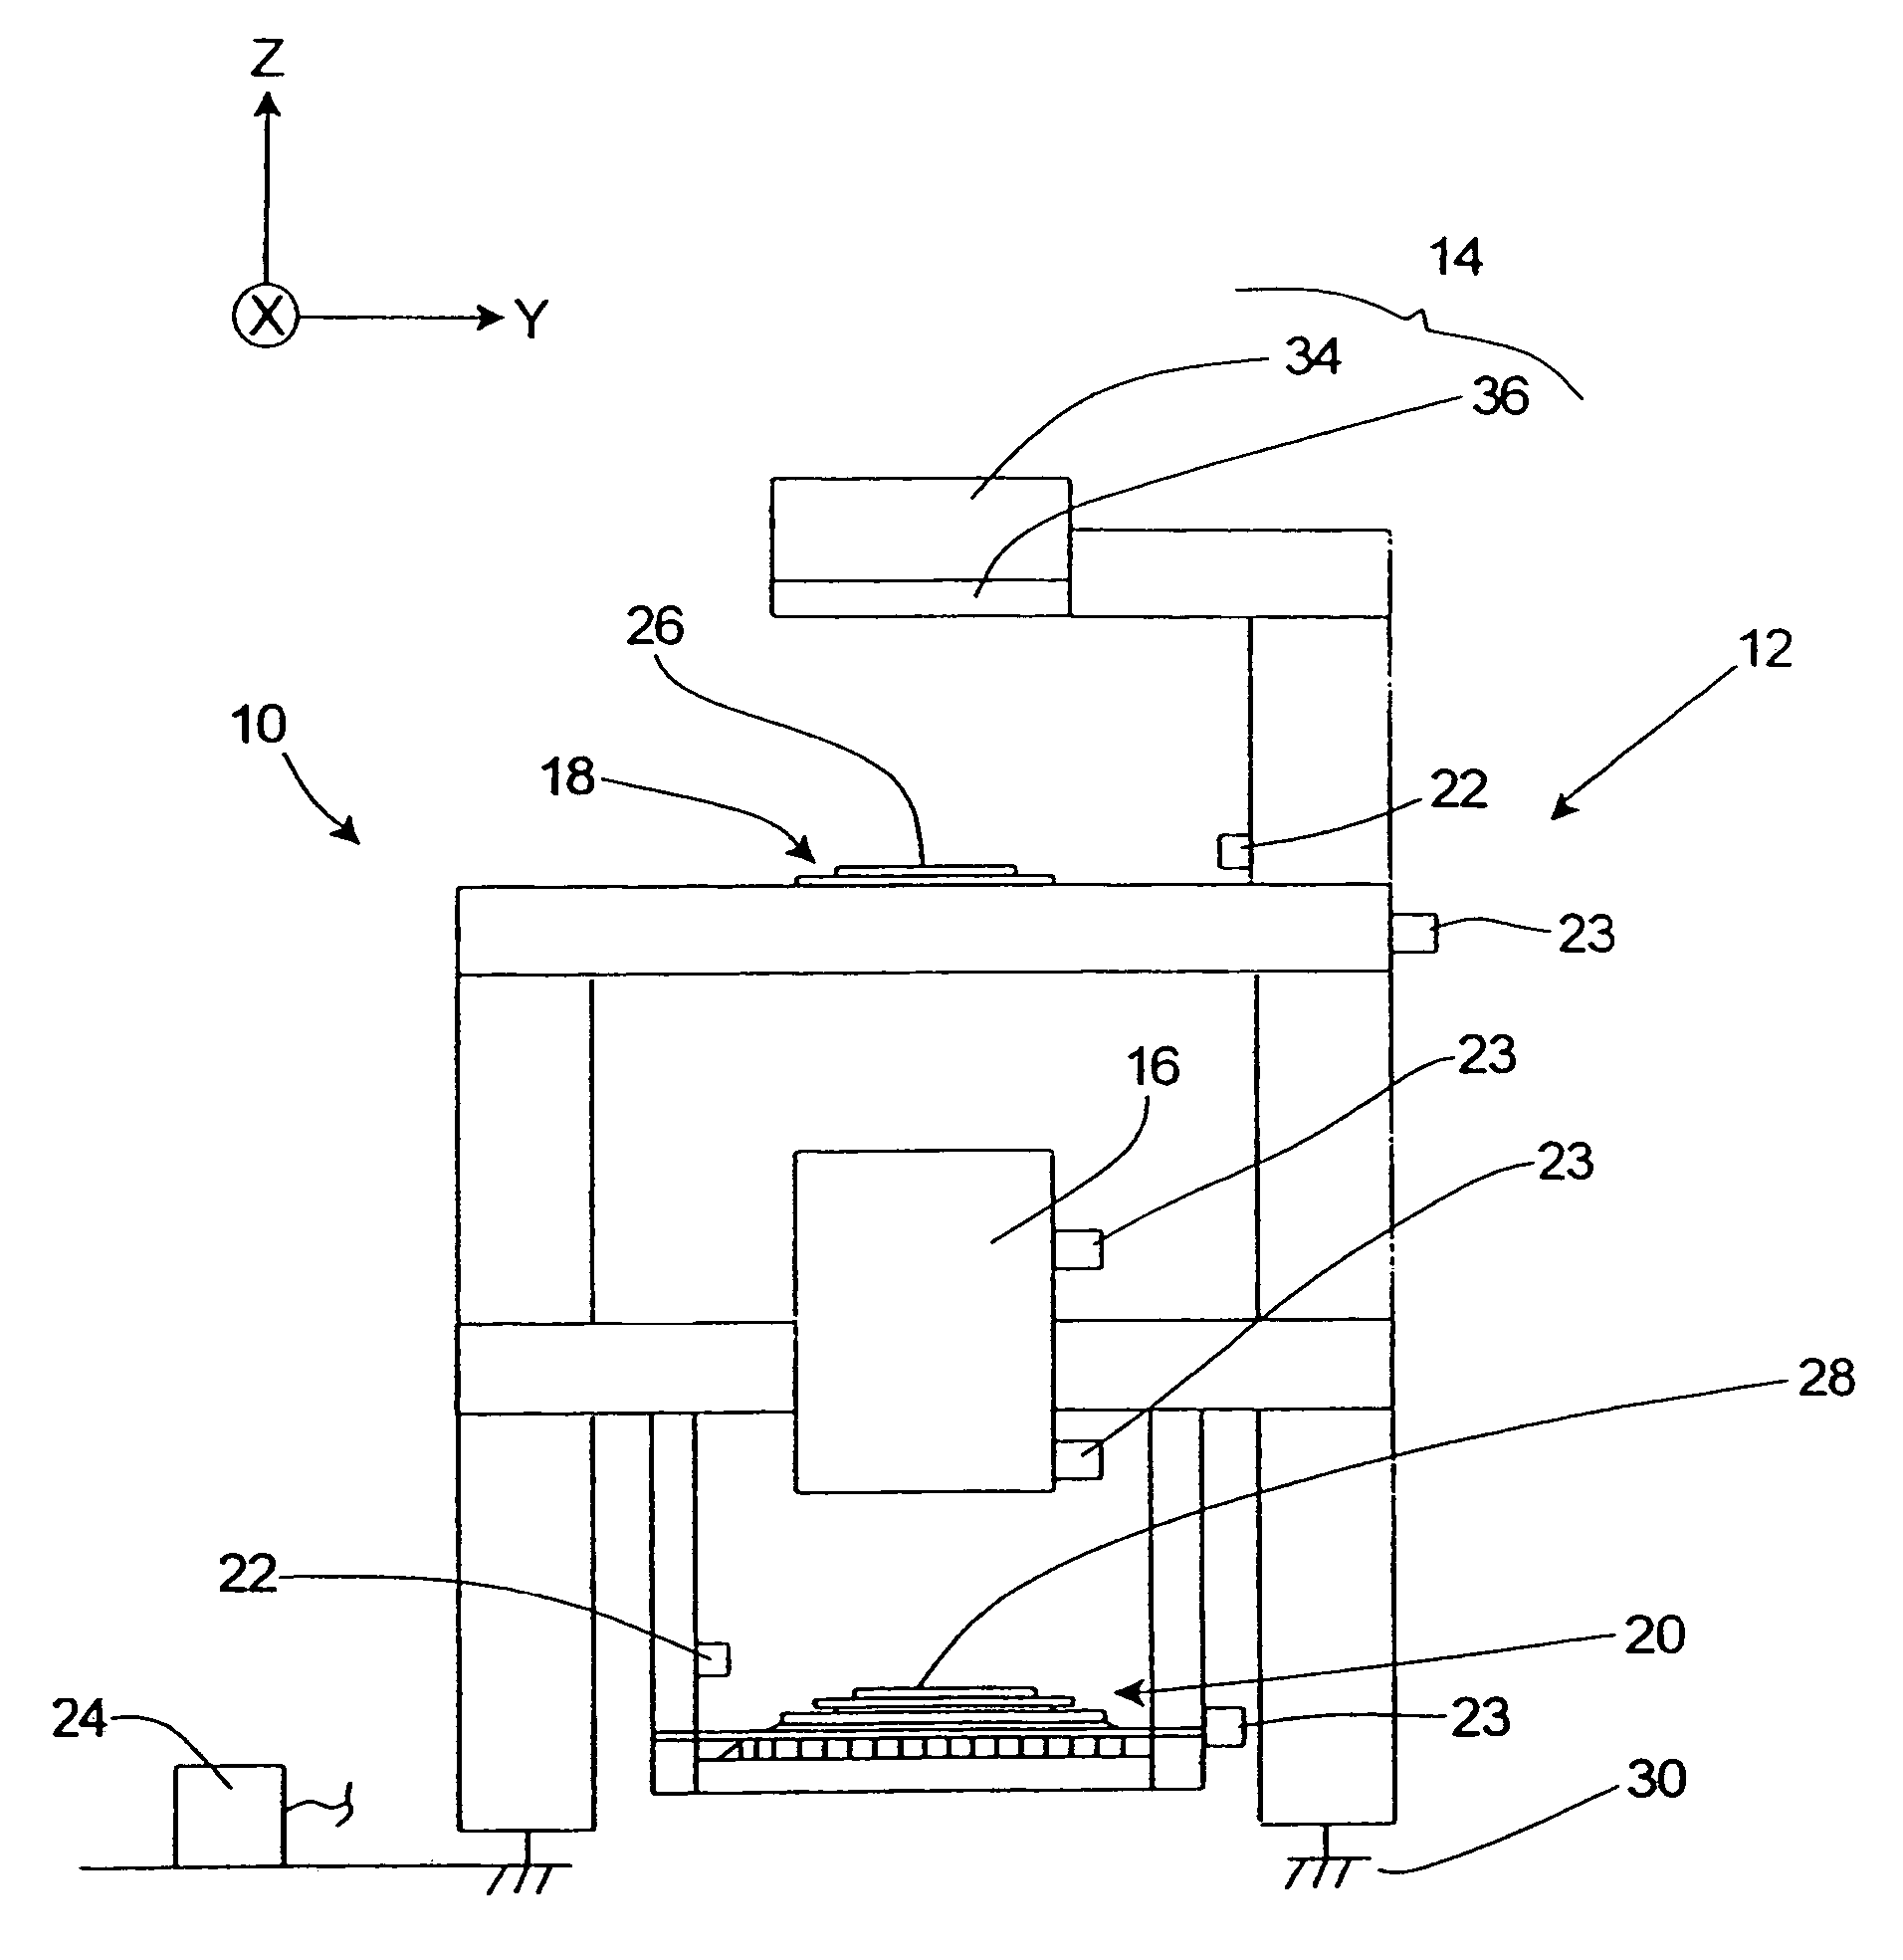 Minimum force output control method for counter-mass with cable